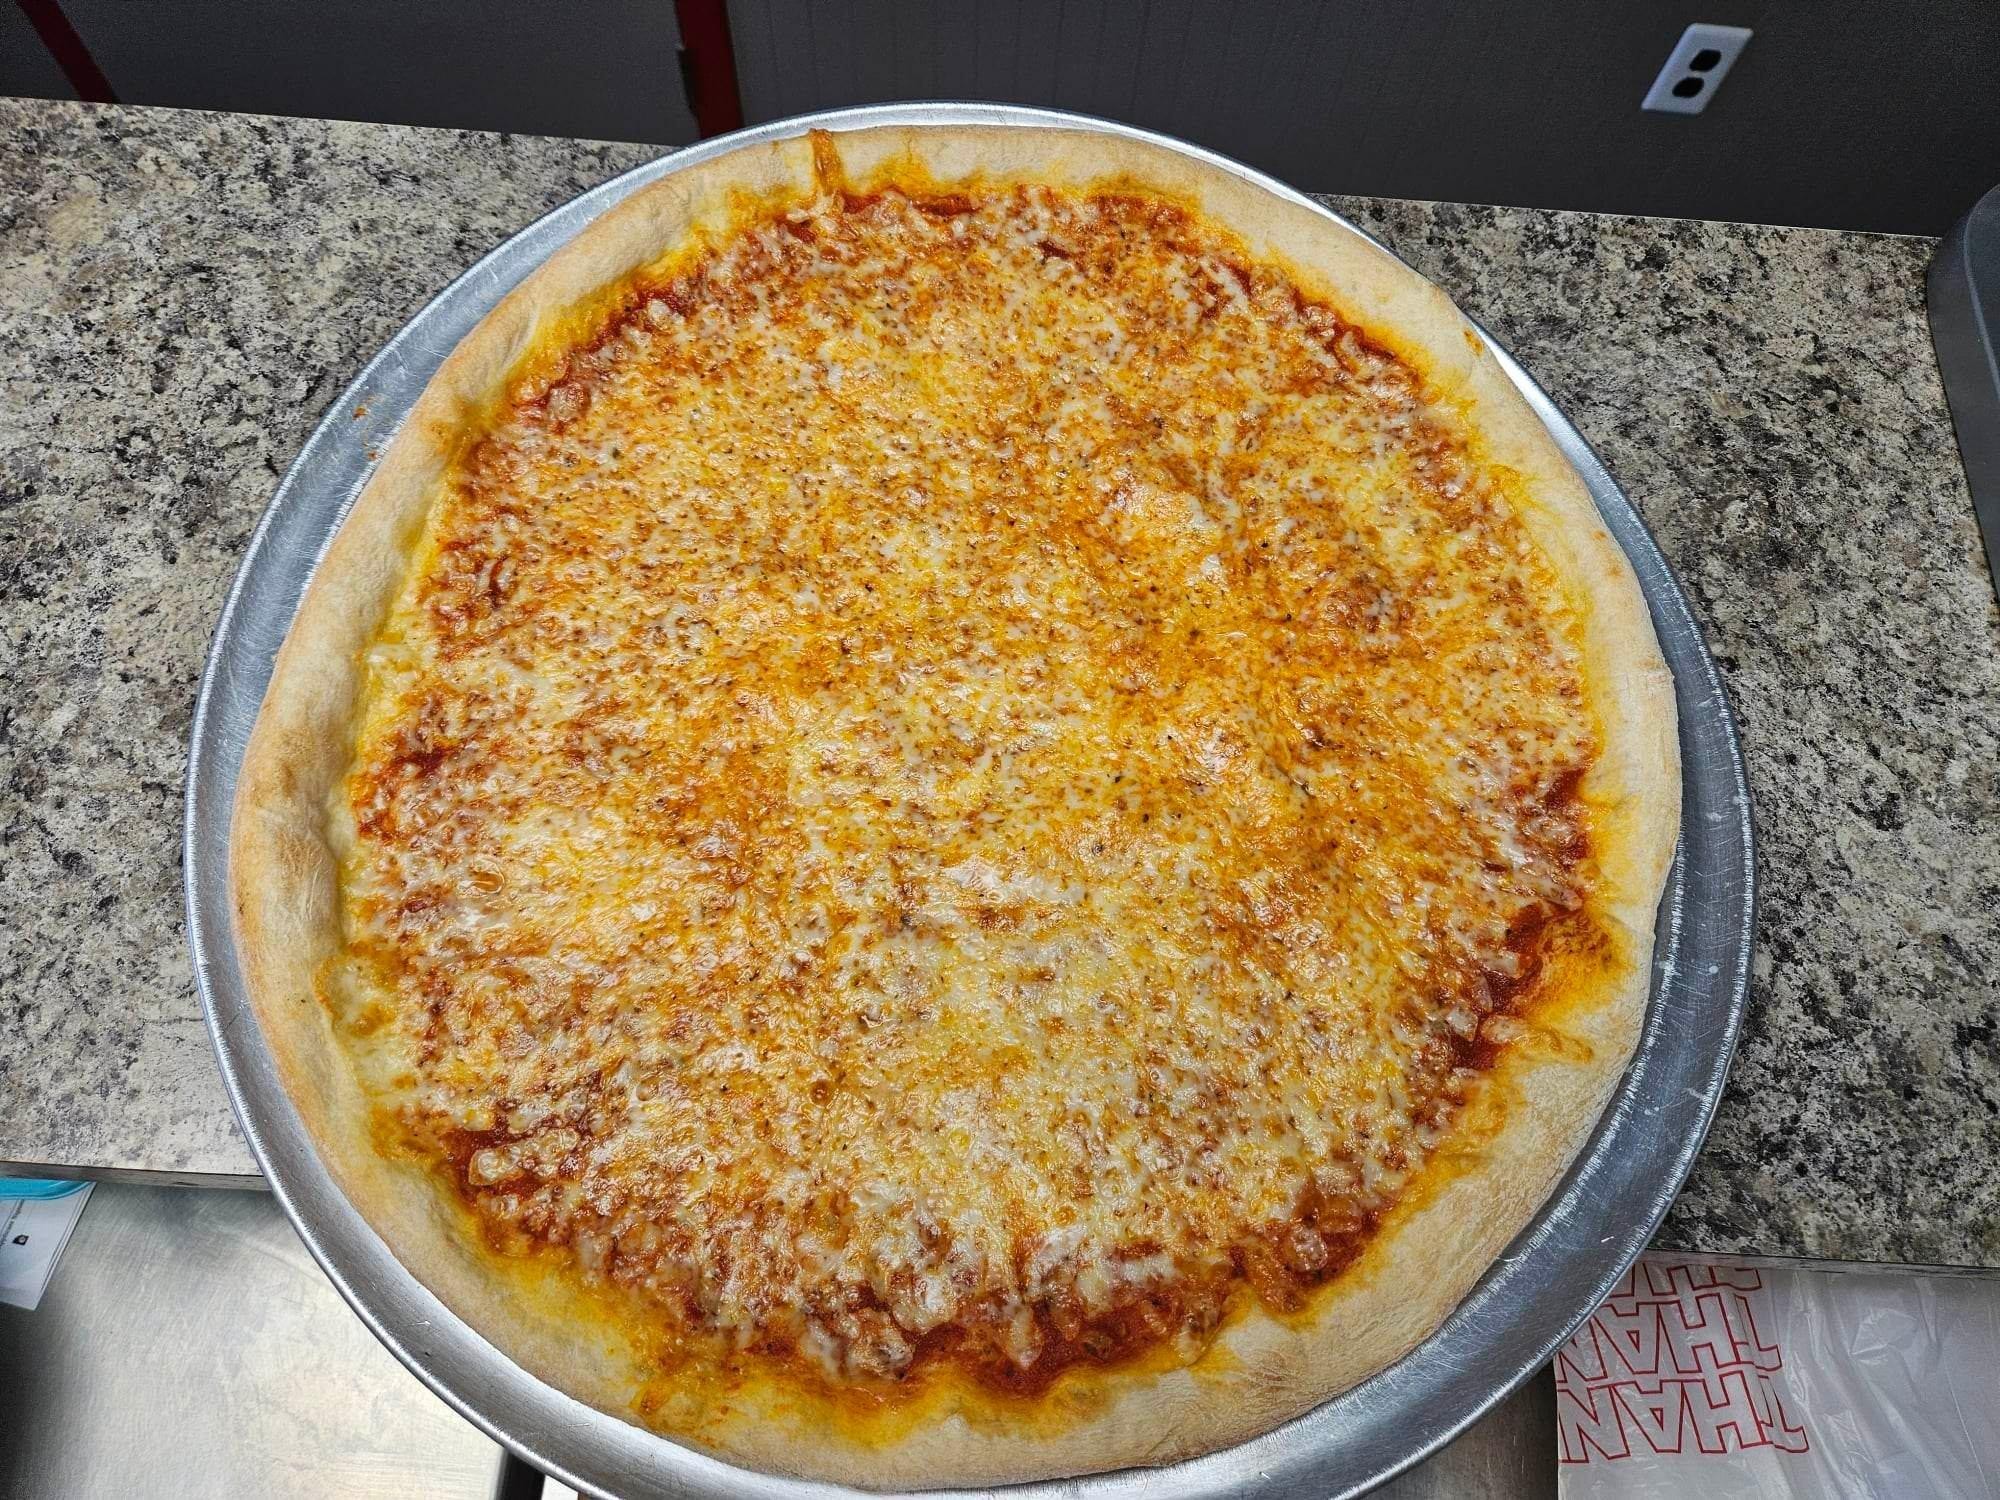 16" MIXED MOZZ AND AMERICAN CHEESE PIZZA